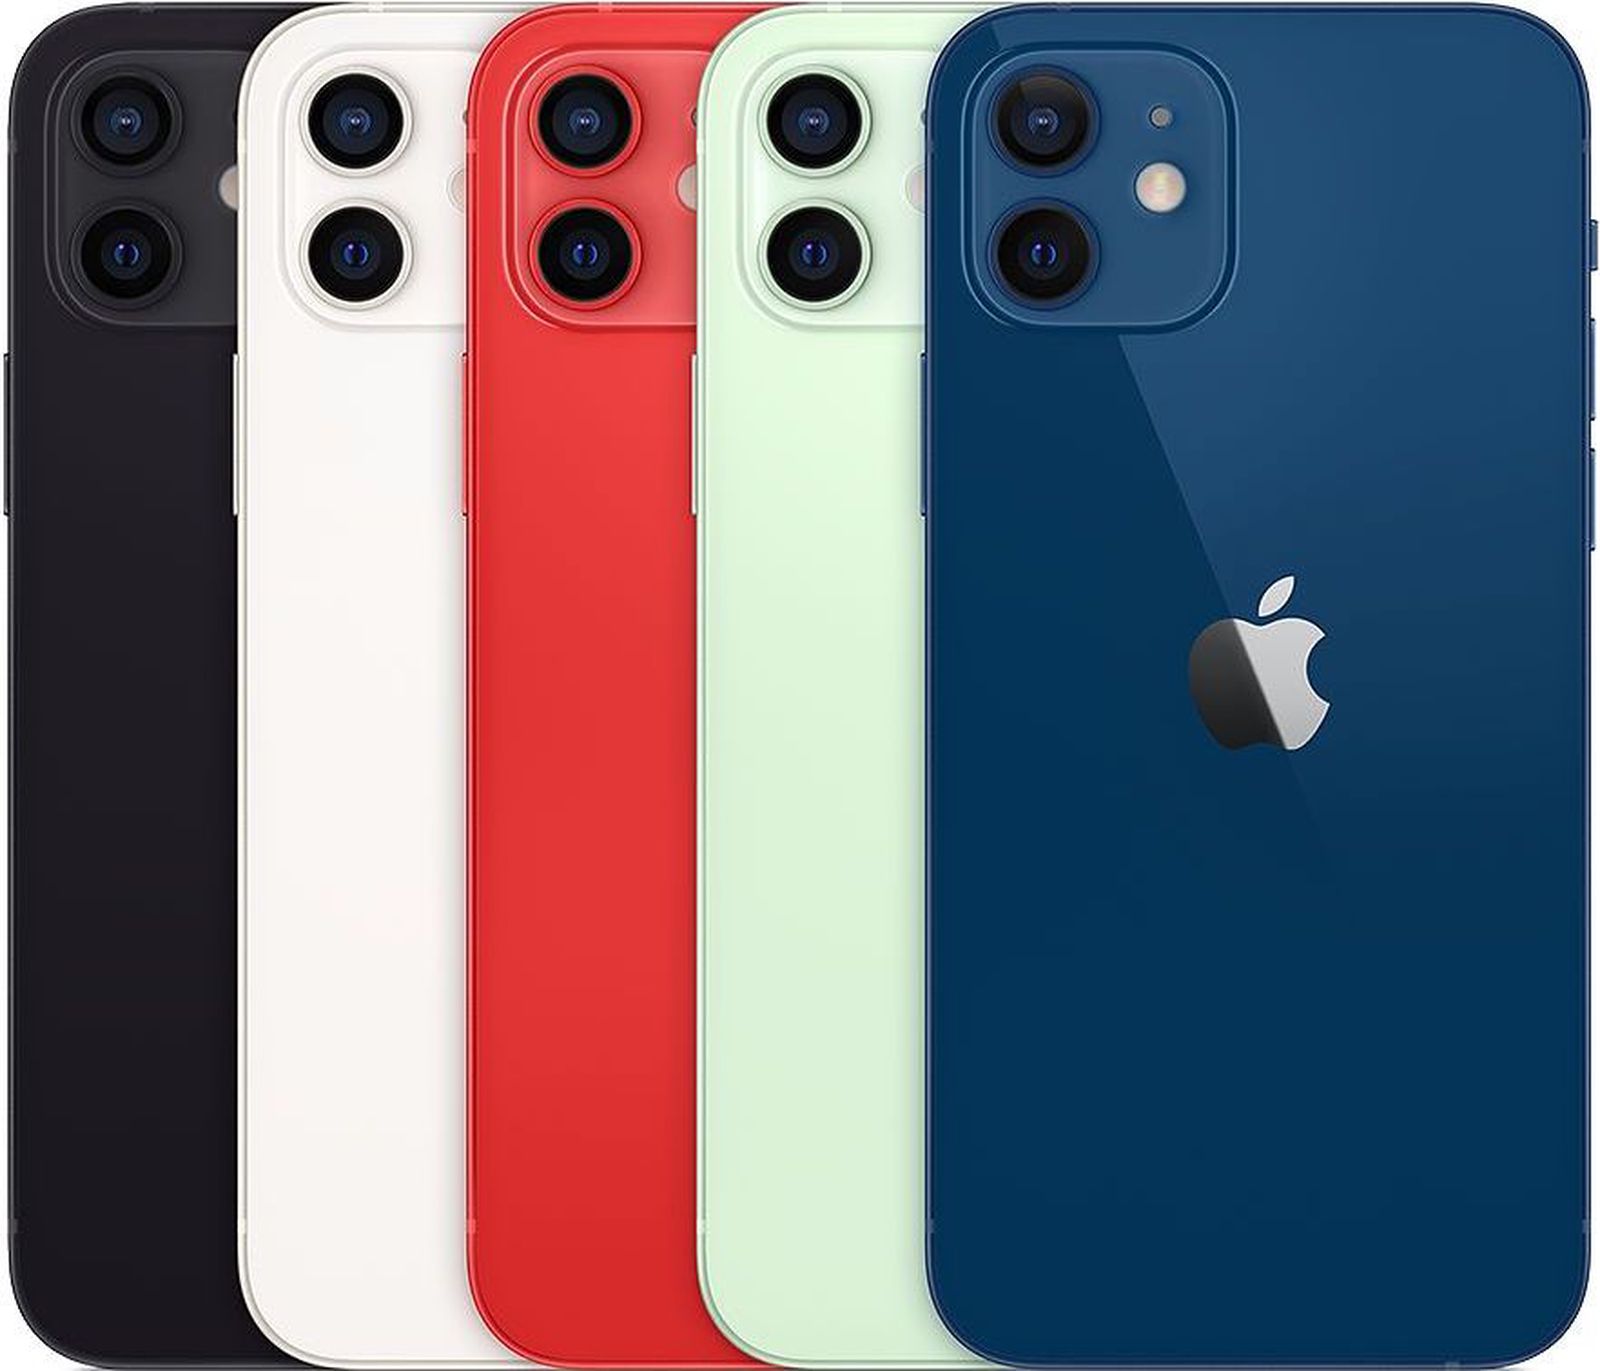 iphone 12 colors grey